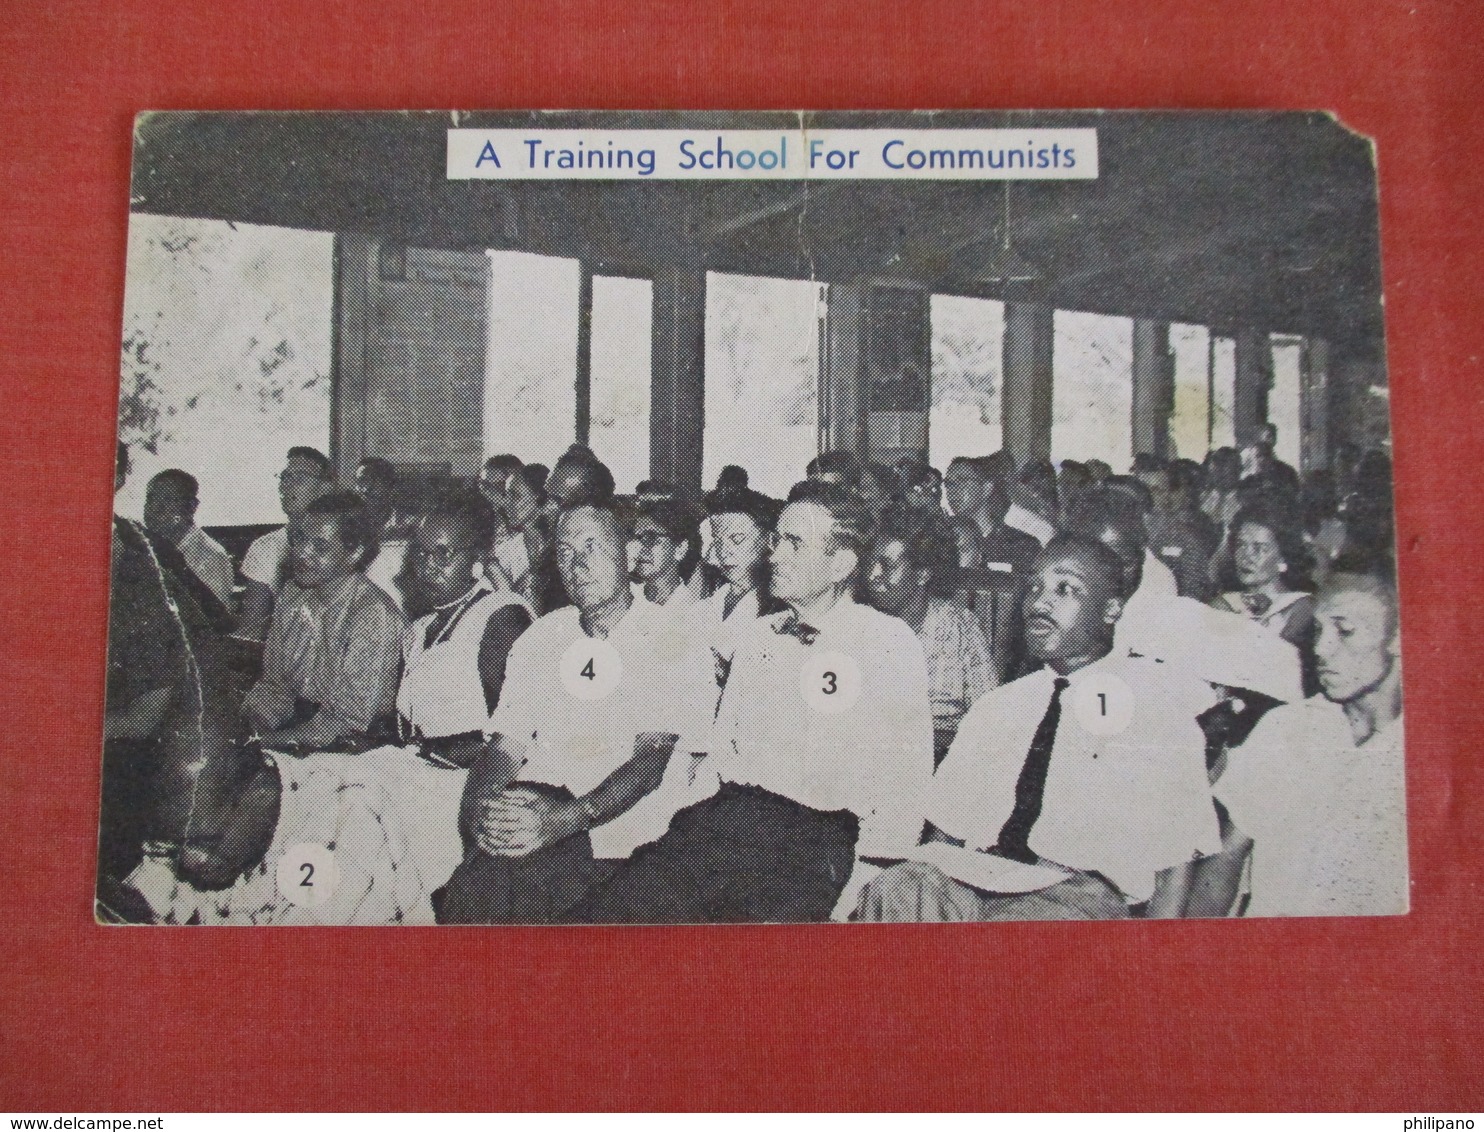 Martin Luther King Jr.  Training School For Communists  "As Is"  Crease   Ref 3043 - Historical Famous People